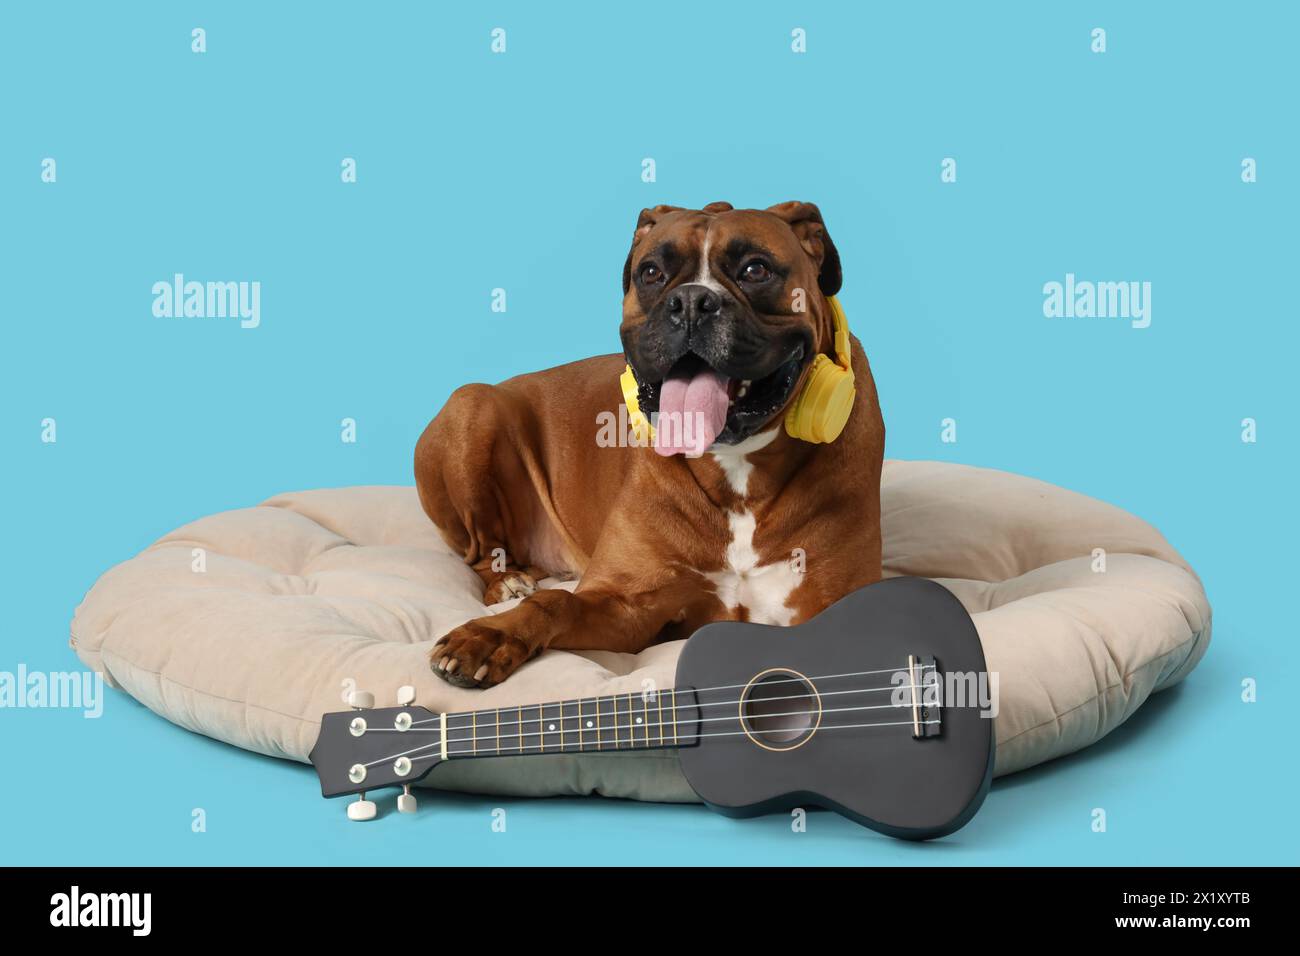 Boxer dog with headphones and guitar lying on pet bed against blue background Stock Photo